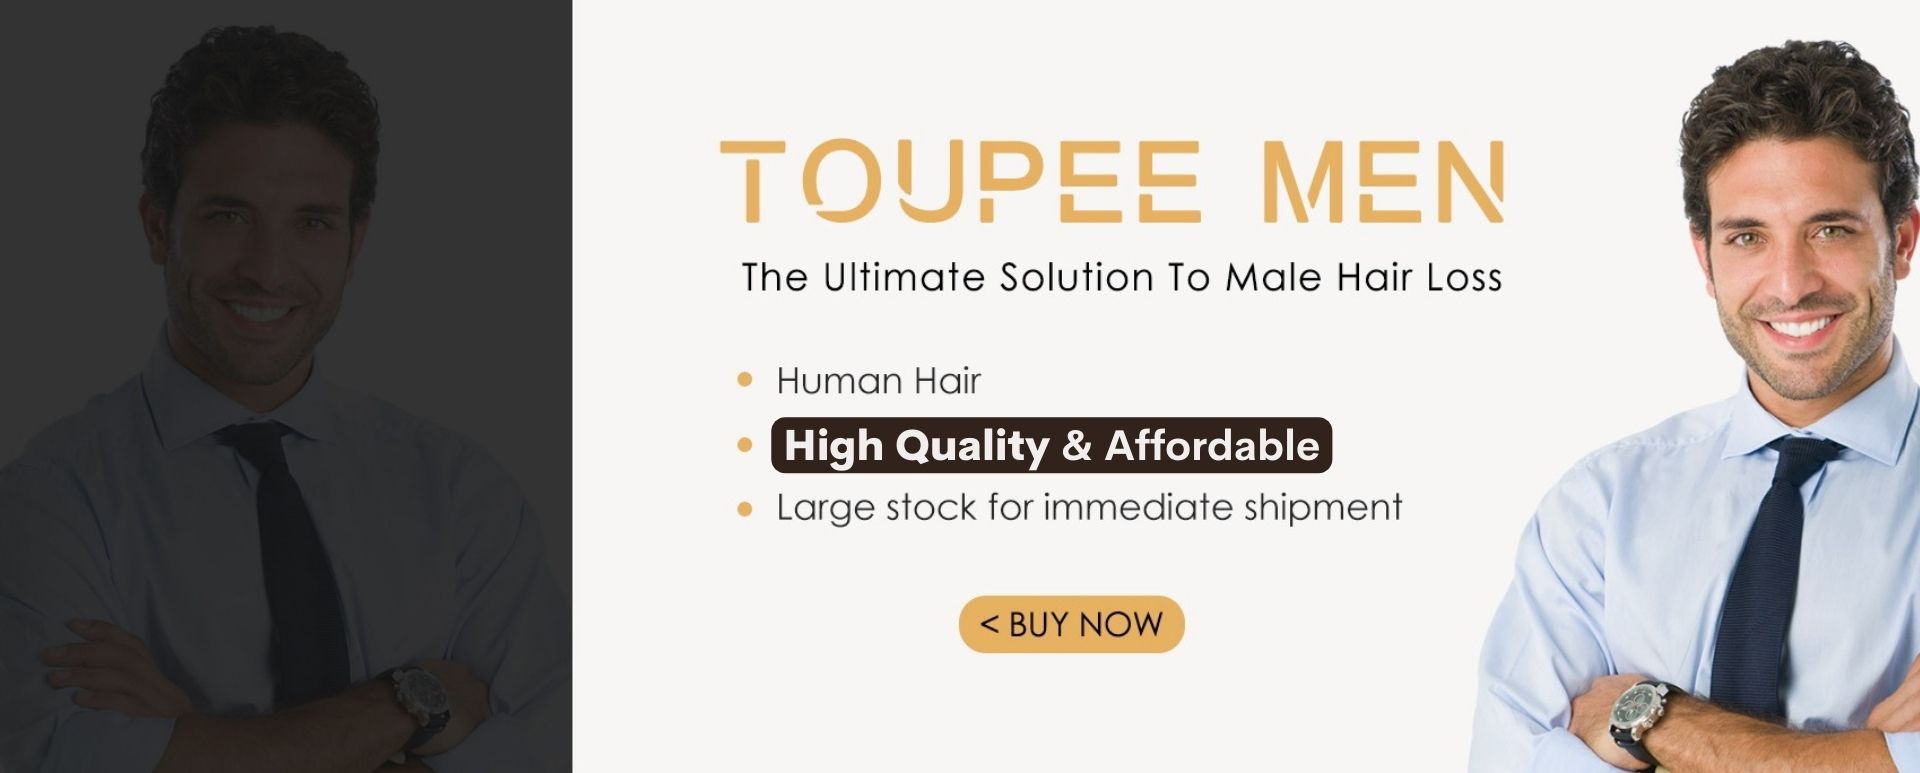 best natural looking solution to male hair loss Toupee men high quality and affordable usa Feel more Like U Hair  hair factory warehouses in Atlanta, Miami, Los Angeles, New Jersey, Houston, Chicago, New York & New Orleans. 1 on 1 customer service